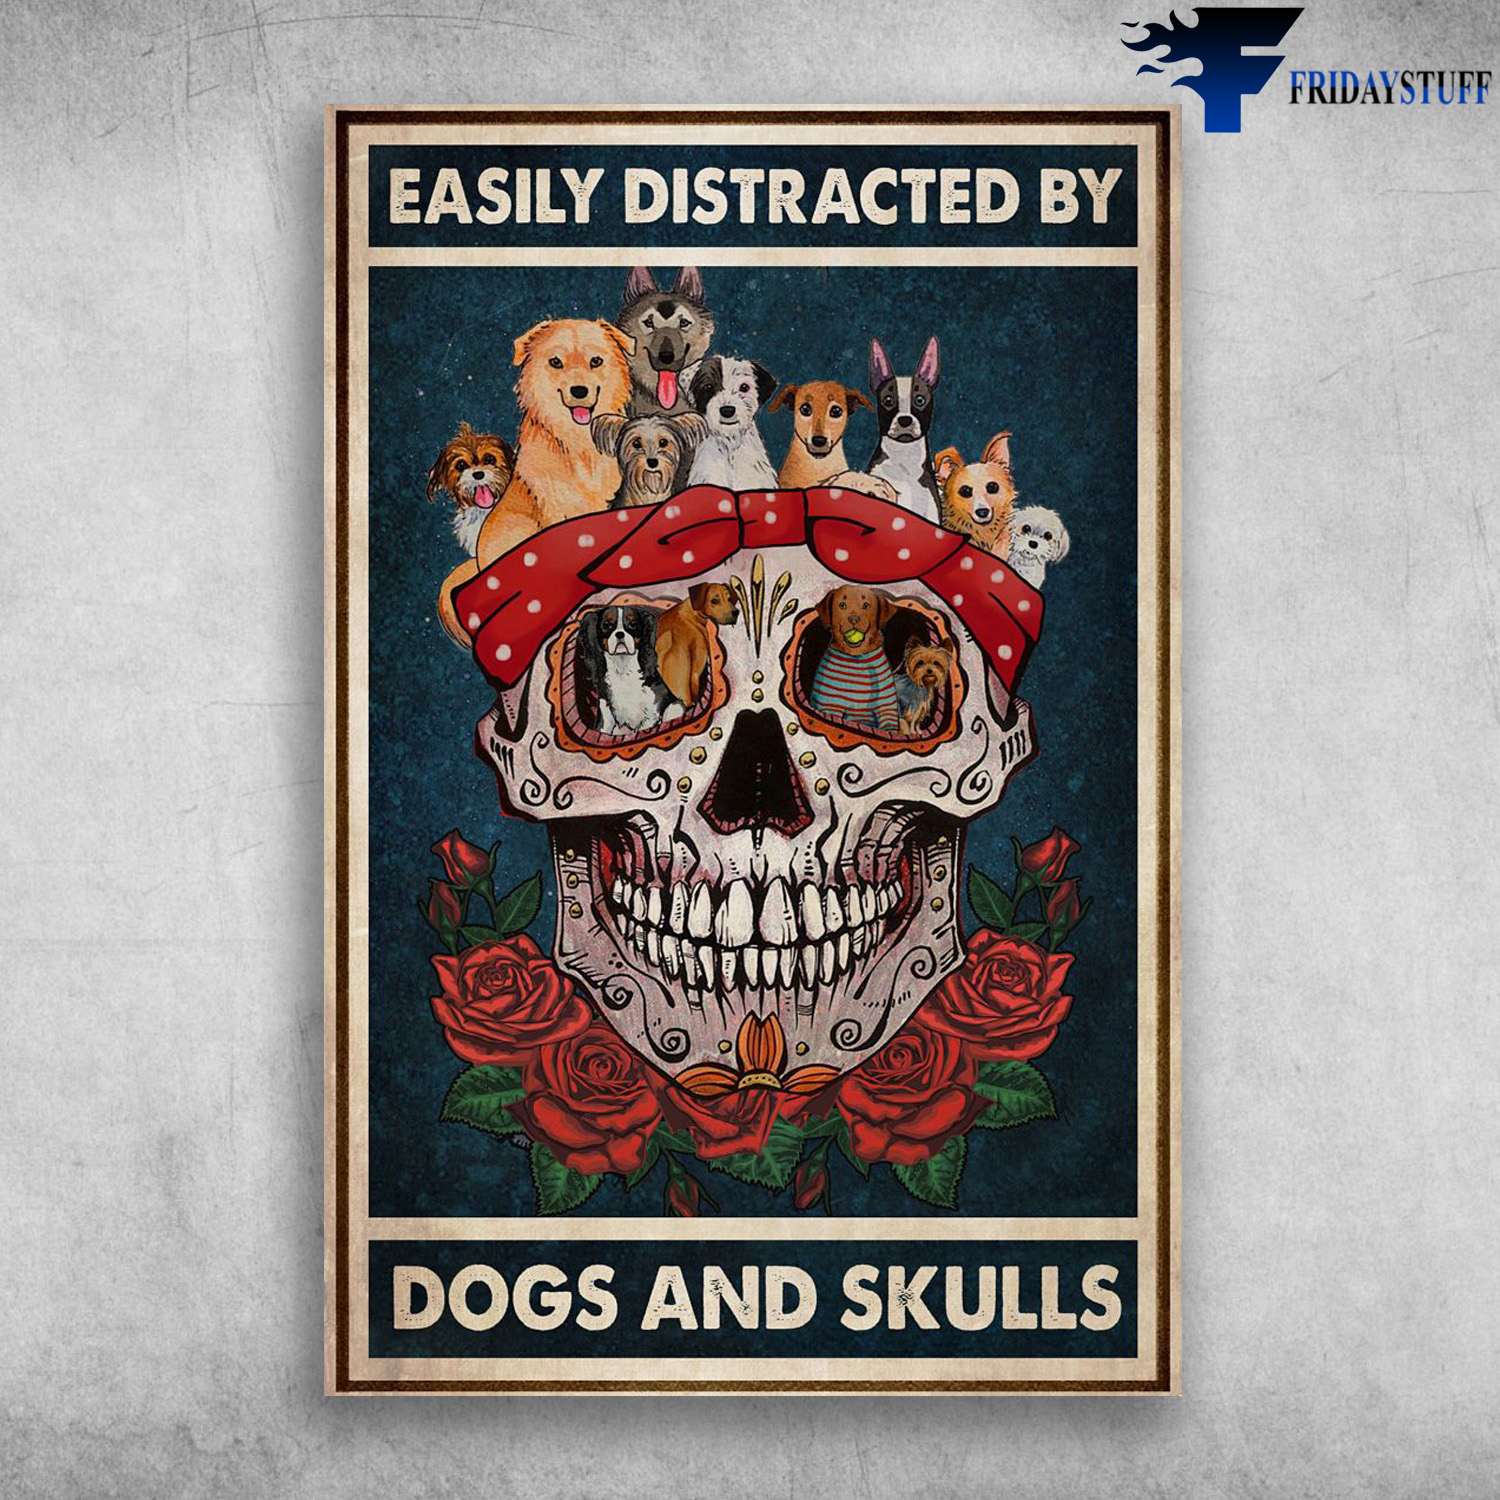 Dogs And The Skull - Easily Distracted By Dogs And Skulls